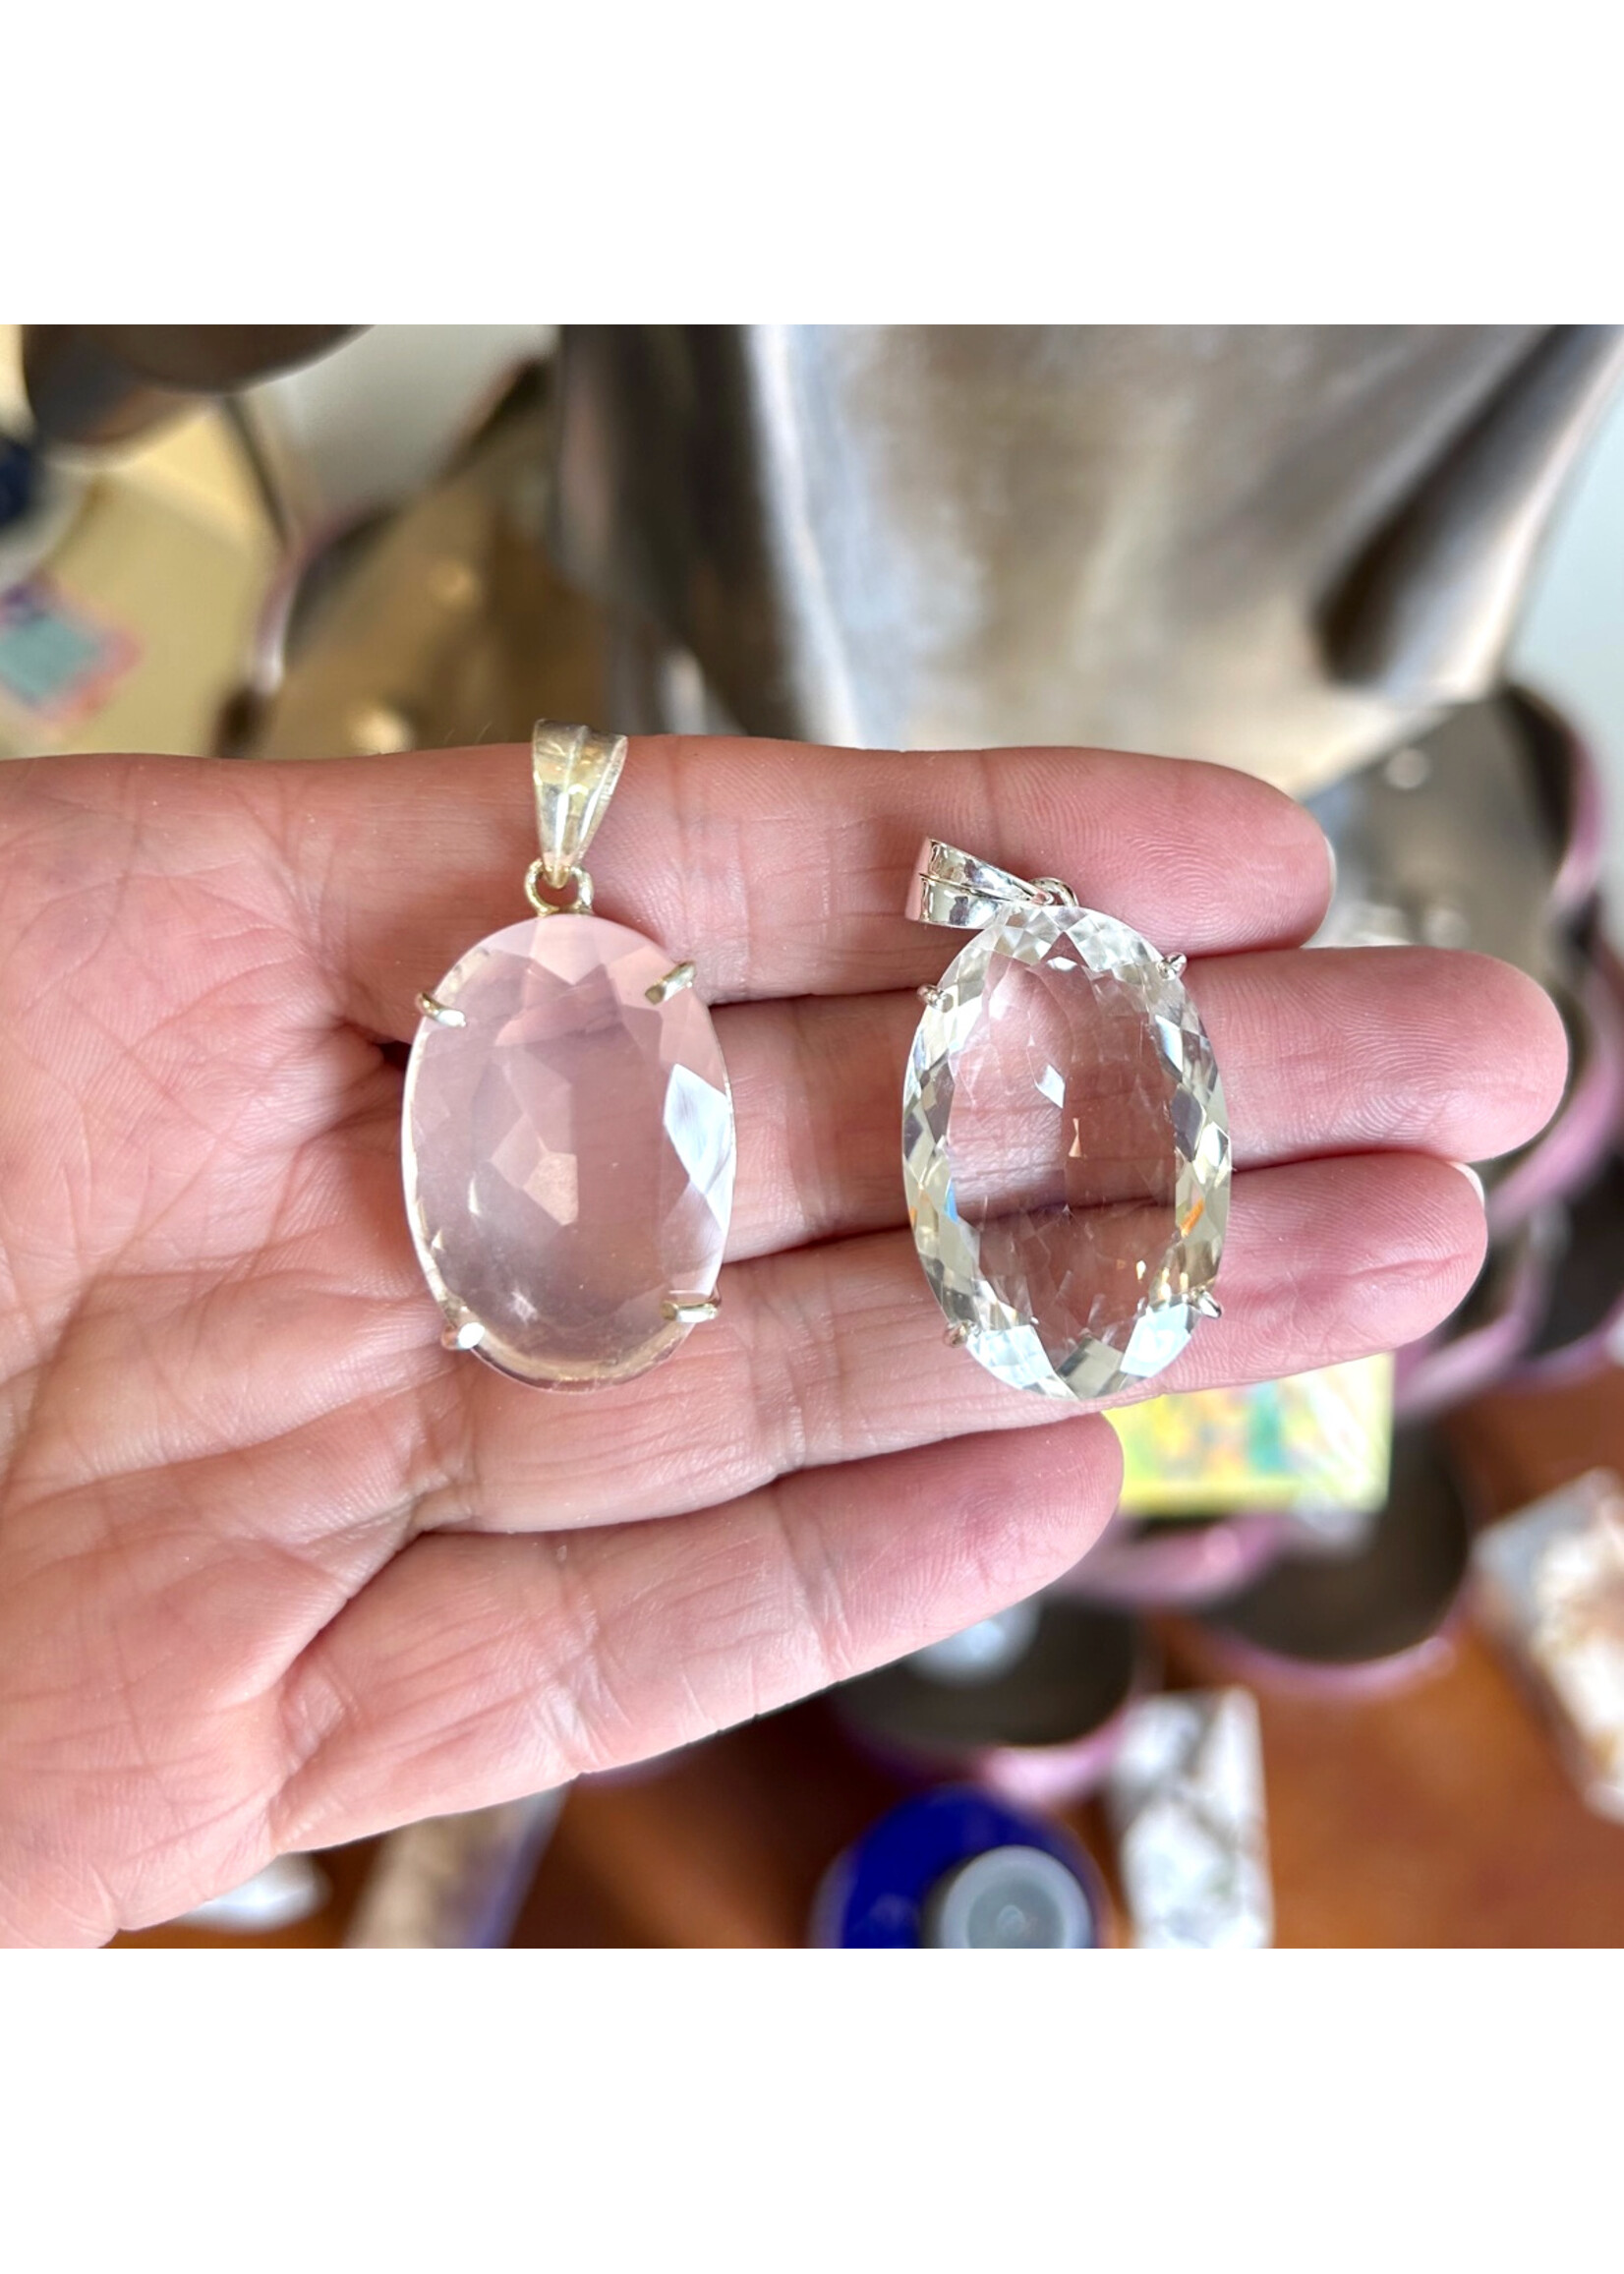 Faceted Pendants Oval